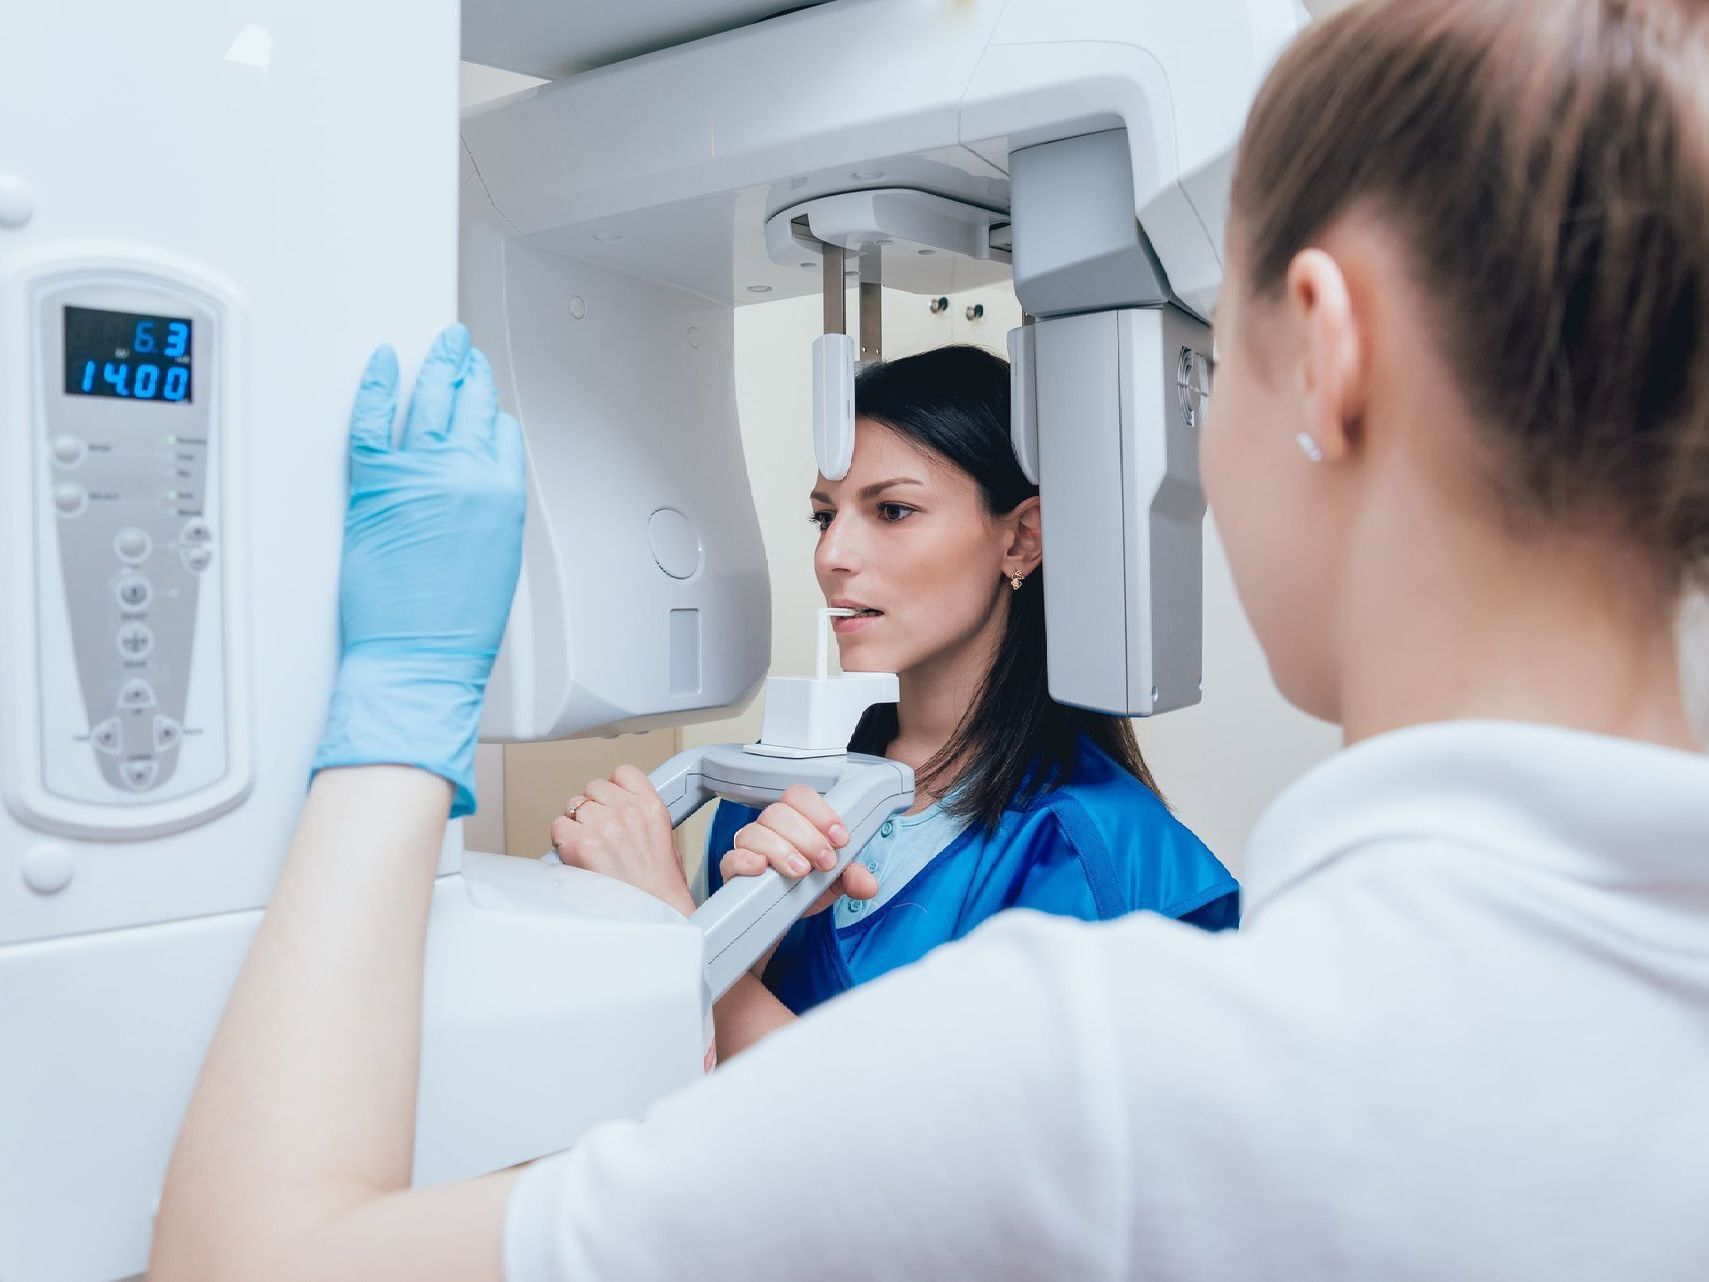 An image of a dental assistant operating a dental x-ray machine with a patient